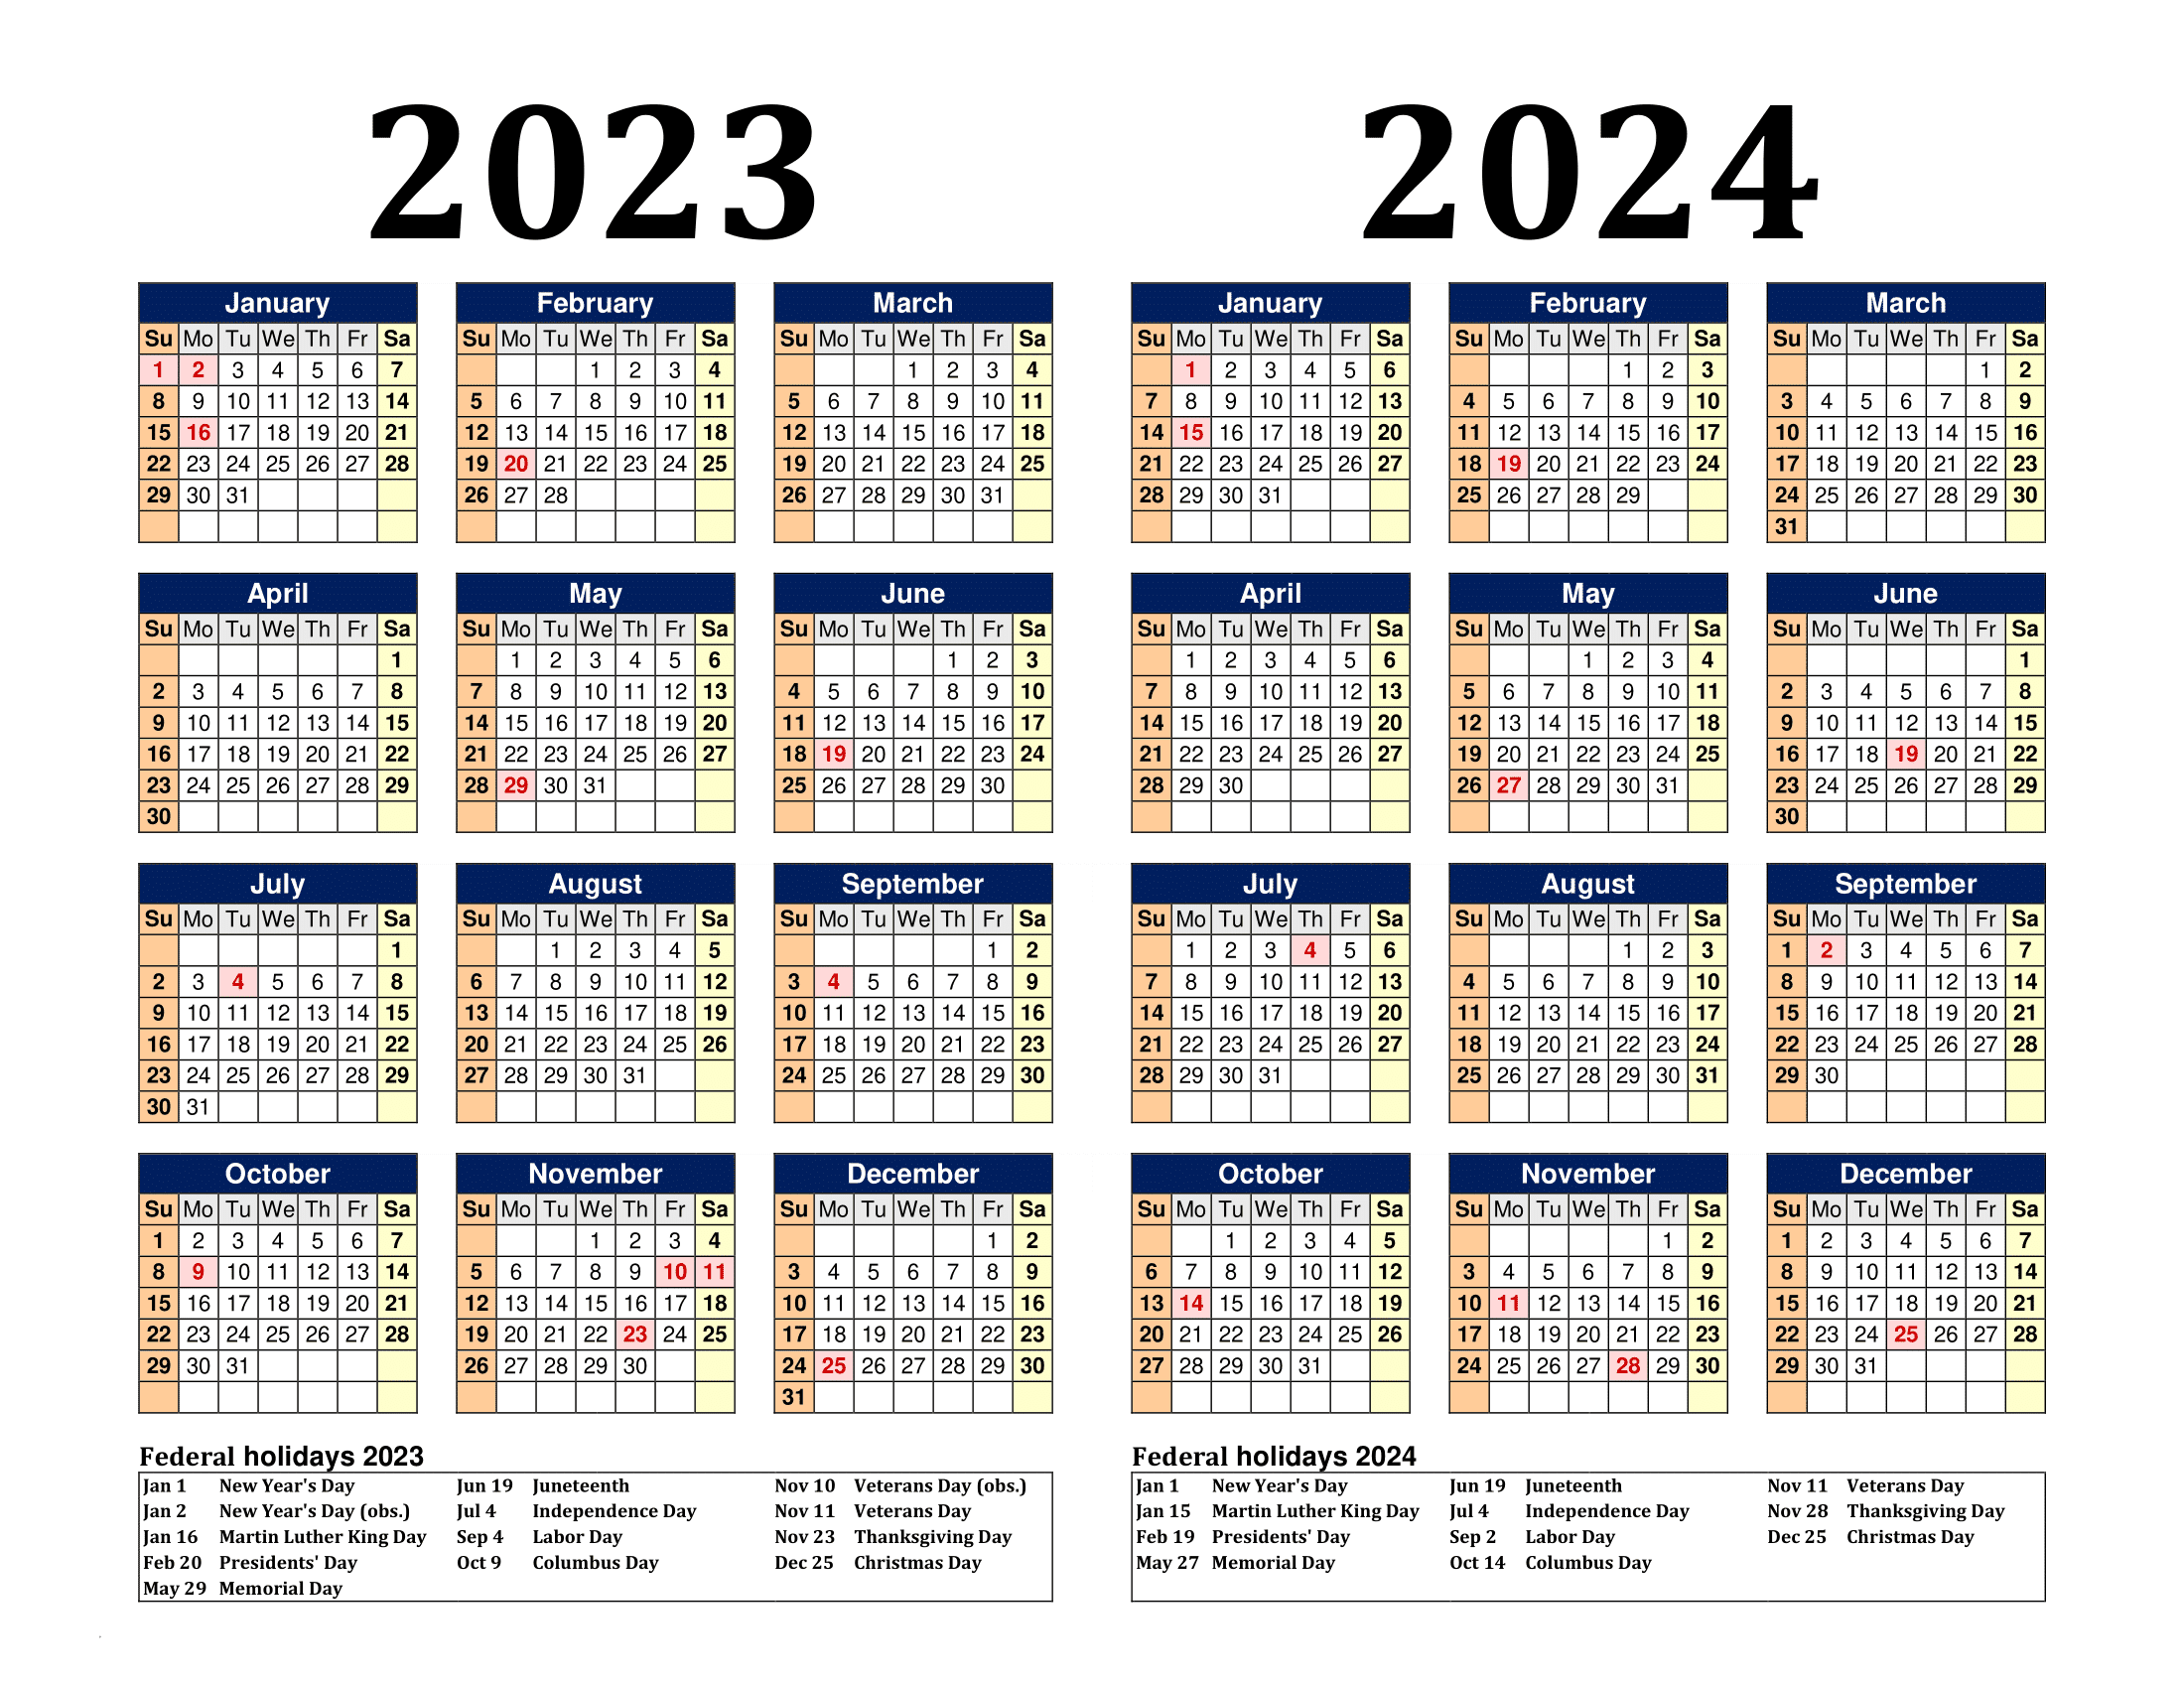 Free Printable Two Year Calendar Templates For 2023 And 2024 In Pdf for Printable Calendar 2023 And 2024 With Holidays